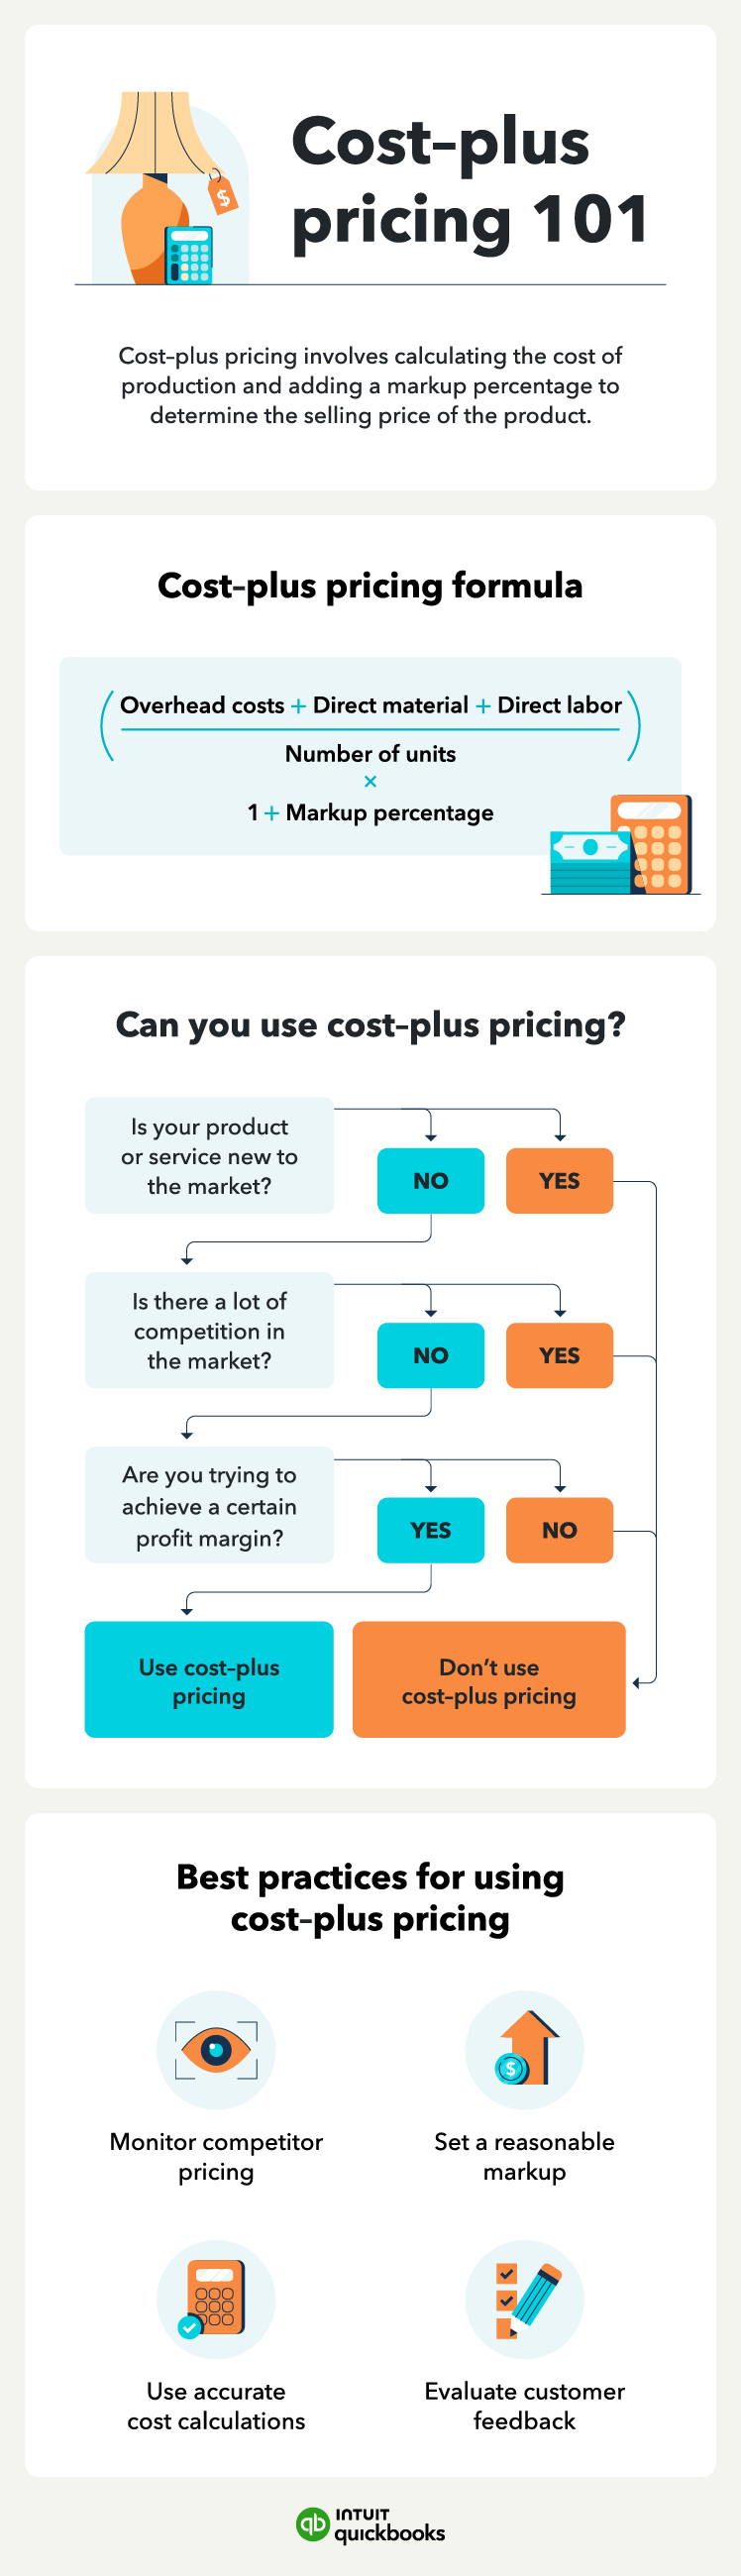 An infographic of who to use and setup cost-plus pricing in your business.